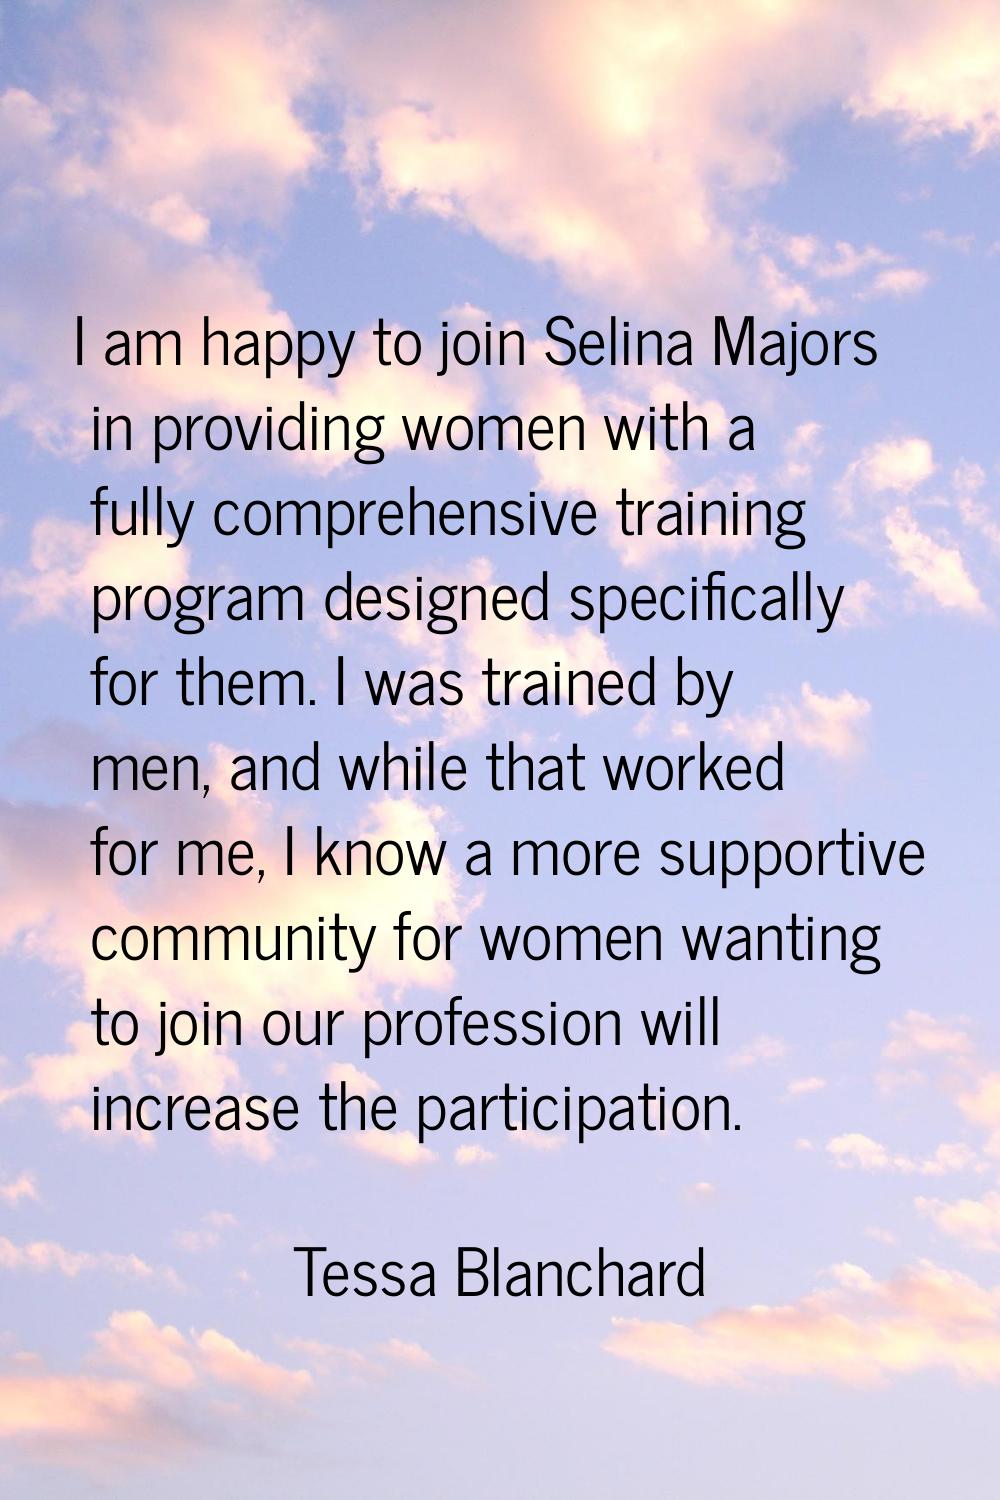 I am happy to join Selina Majors in providing women with a fully comprehensive training program des